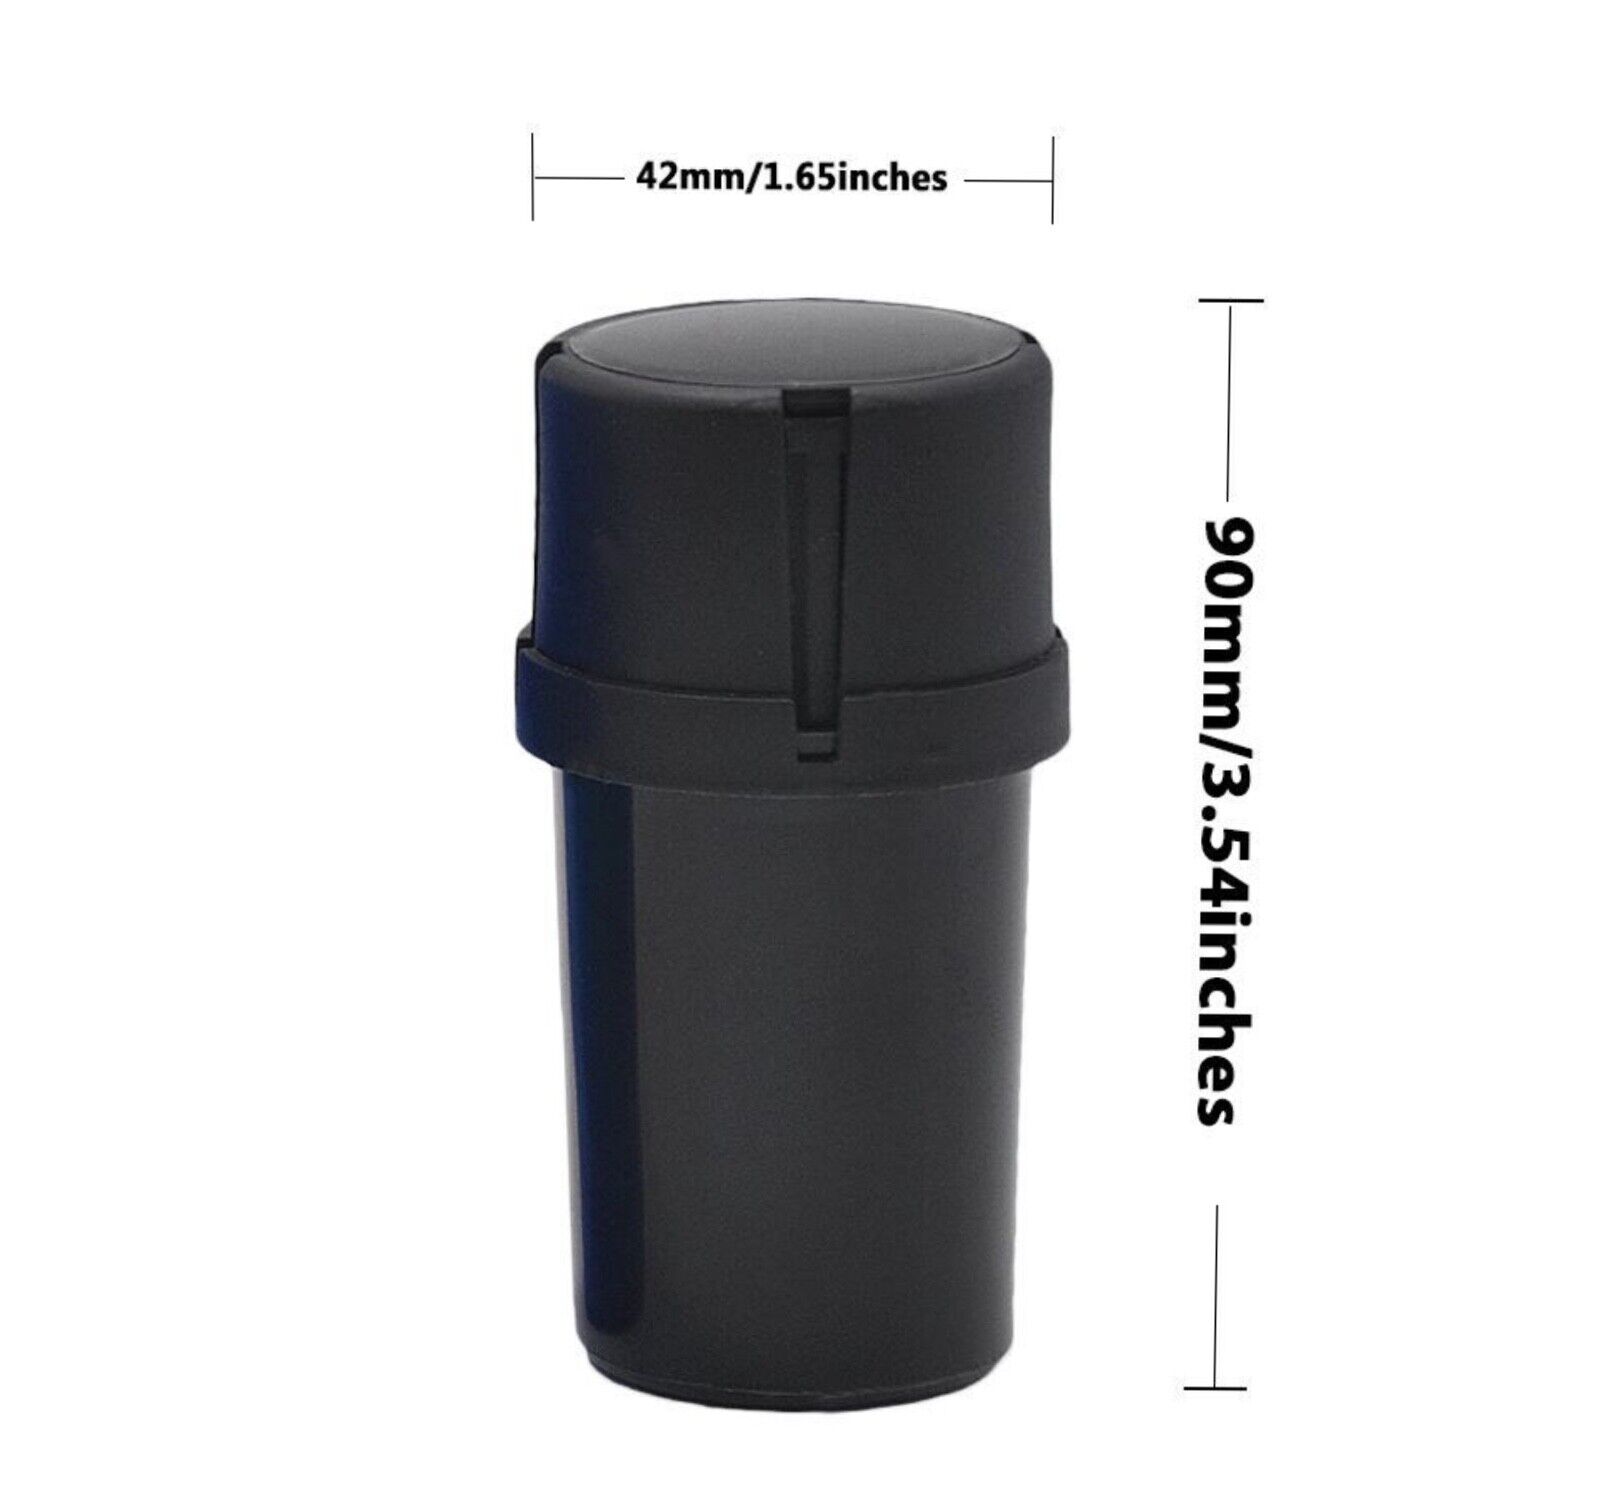  Smell Proof container with grinder  US SELLER SAME DAY SHIP